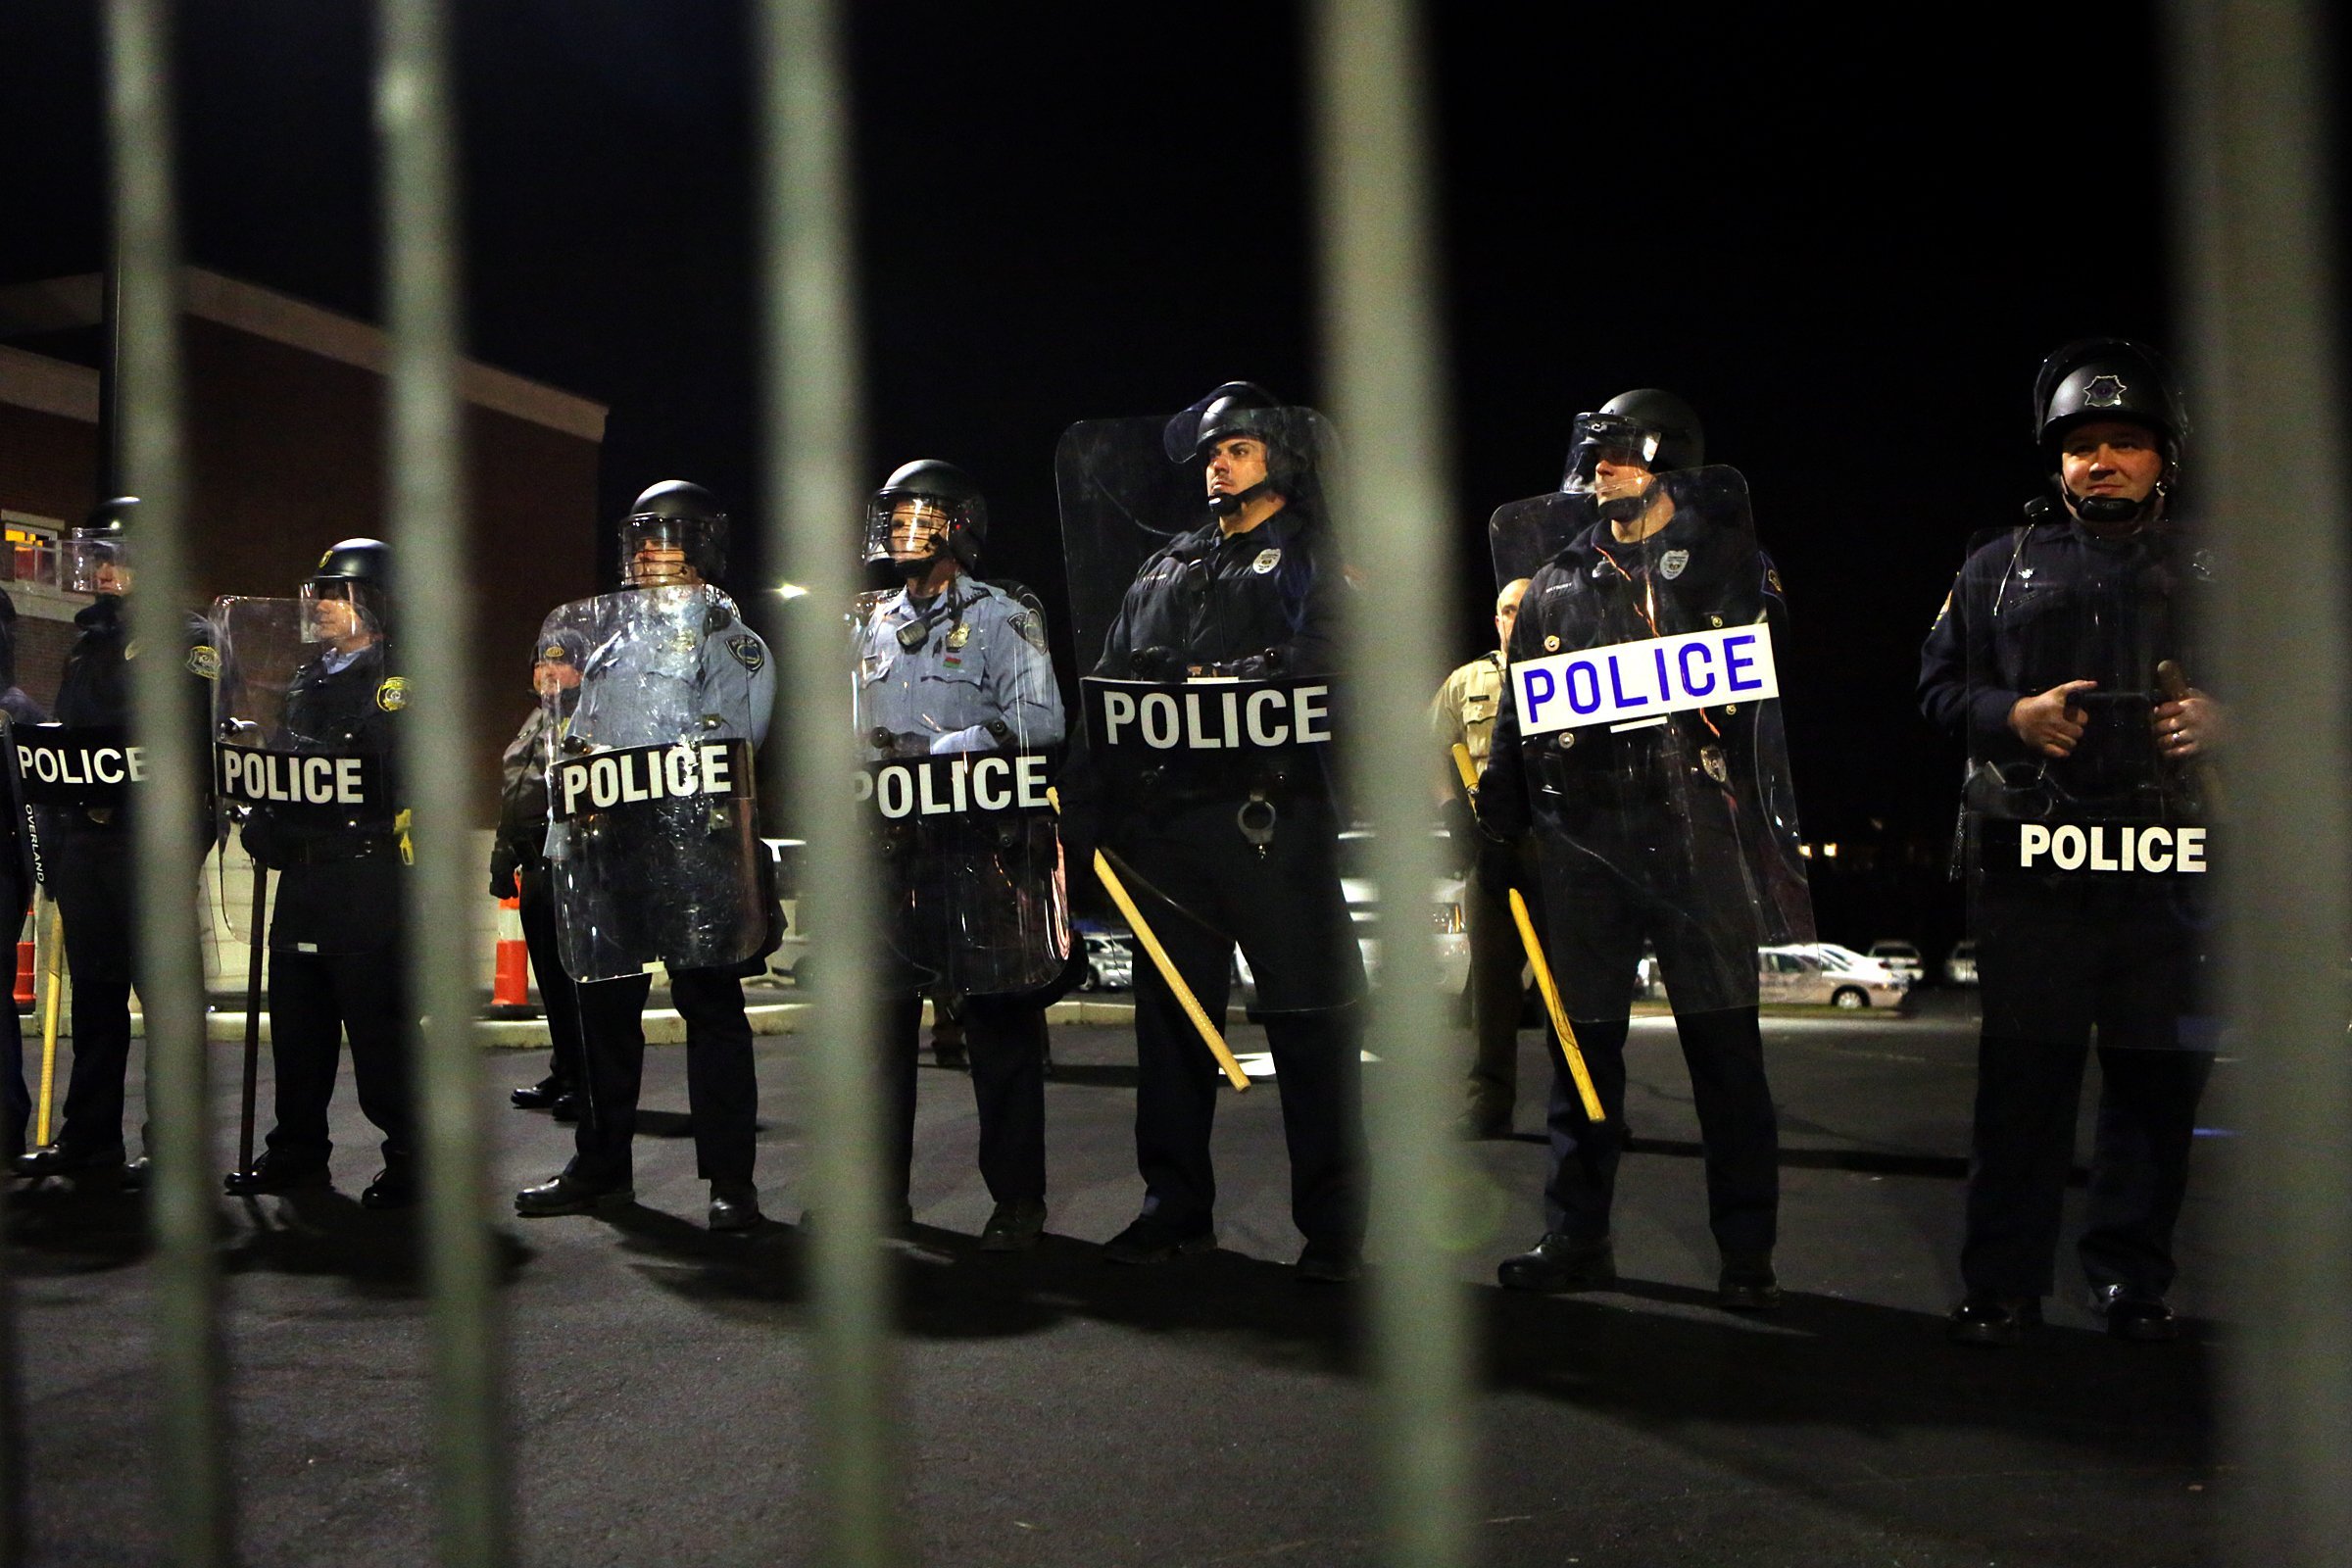 Police form a line opposite of protesters in front of the police station on Nov. 19, 2014. (Huy Mach—St. Louis Post-Dispatch/Polaris)